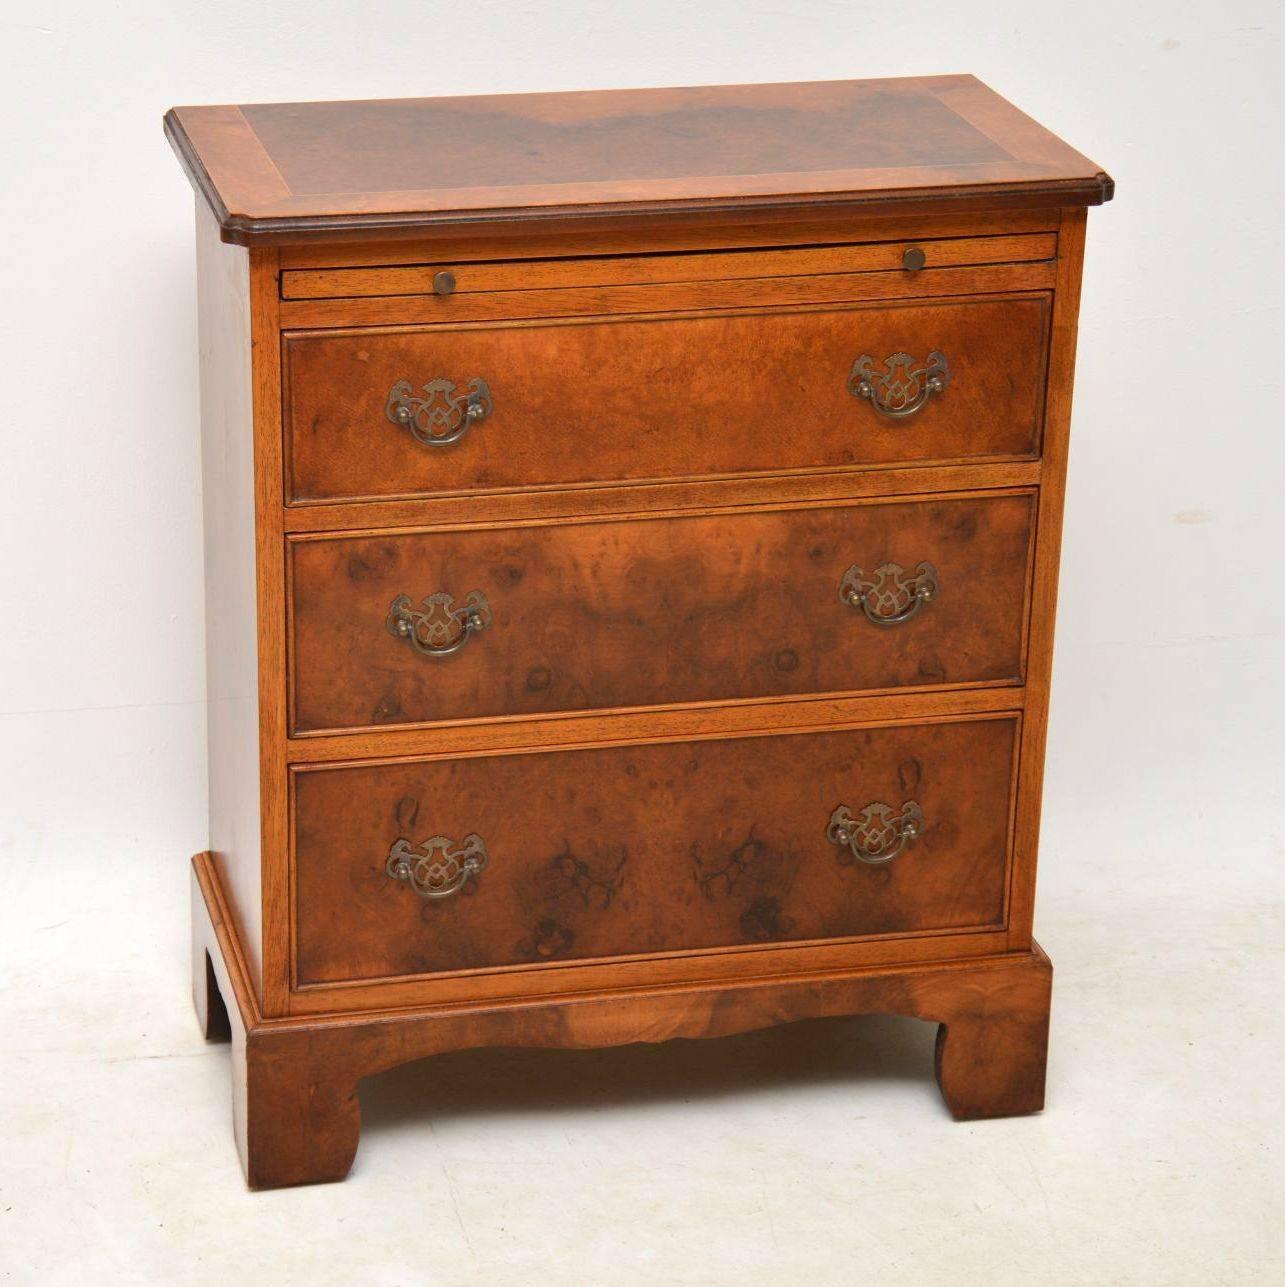 Small antique burr walnut bachelors chest of drawers with a brushing slide and sitting on bold bracket feet. It has lovely figuring in the wood all over and a lovely warm color too. The top is cross banded and the graduated drawers have the original